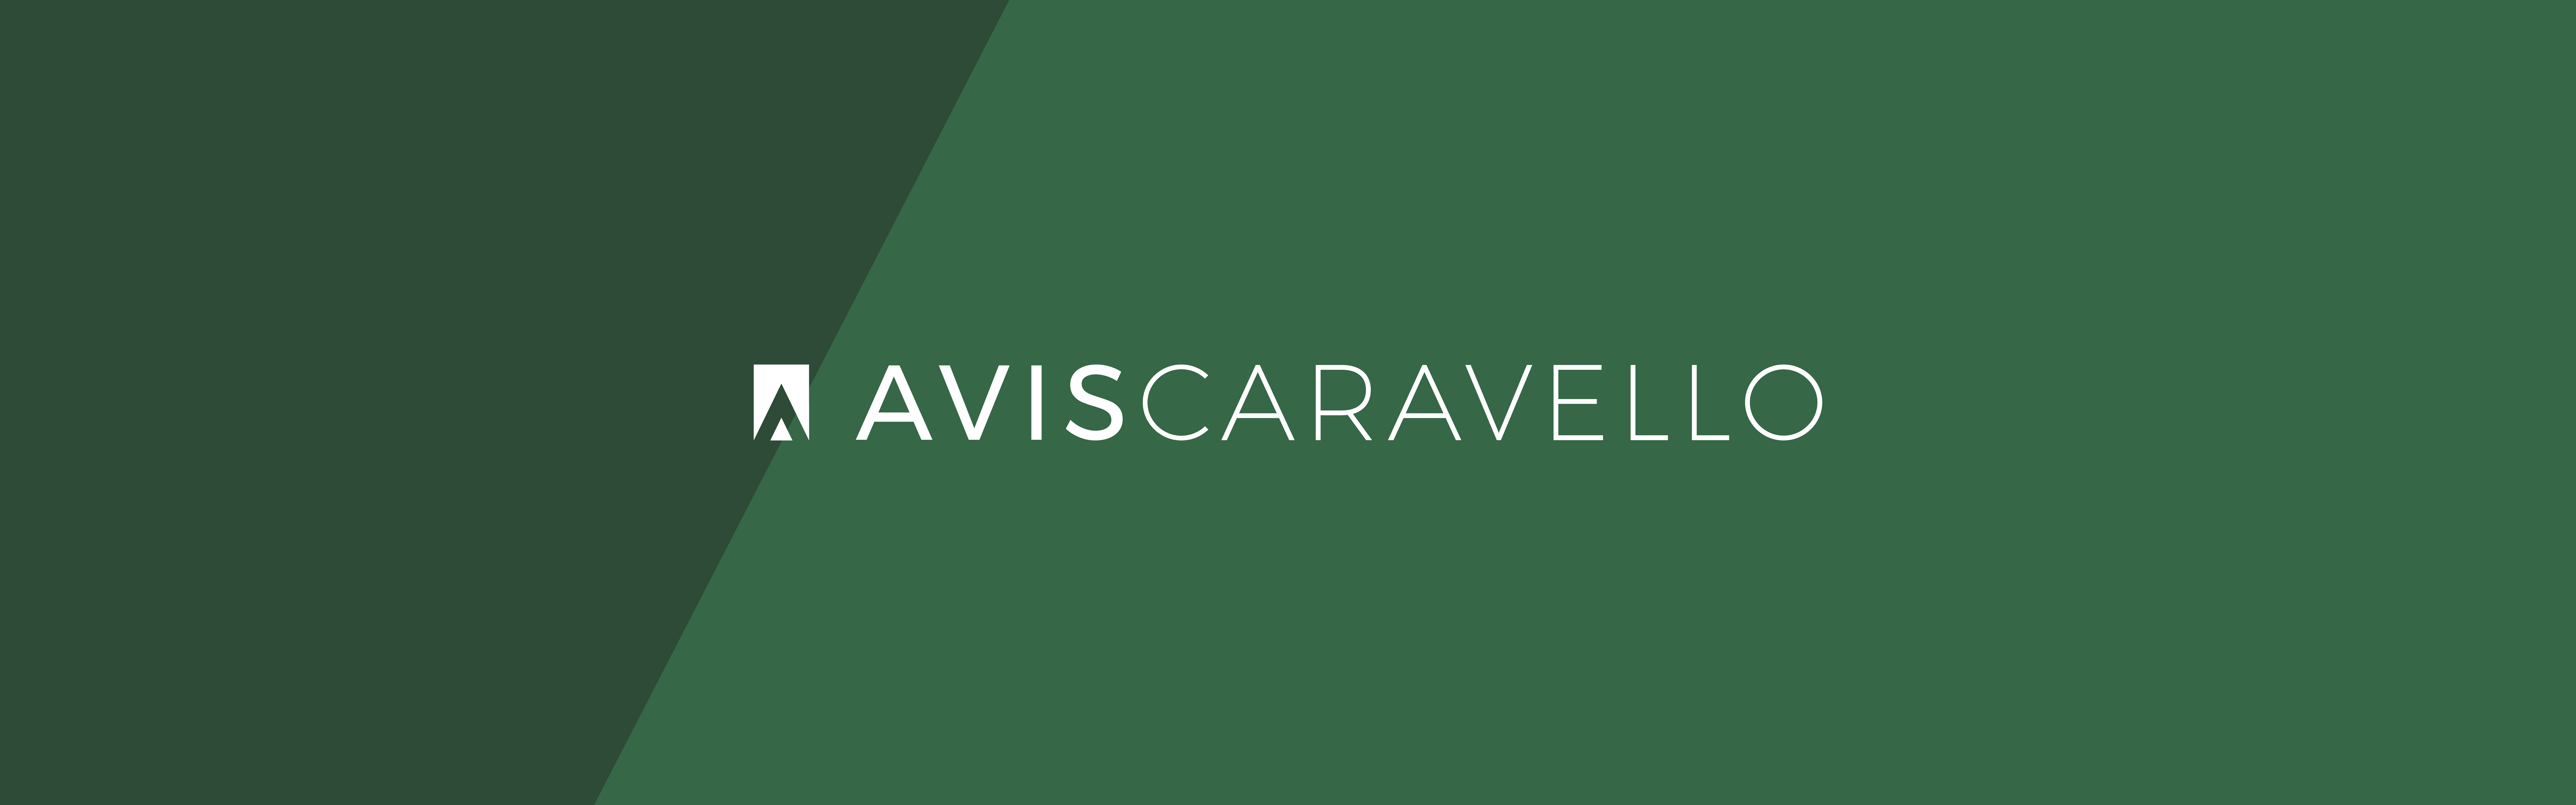 Dark green background with a diagonally placed lighter green stripe, featuring the white text "Avis Caravello" in a sans-serif font.